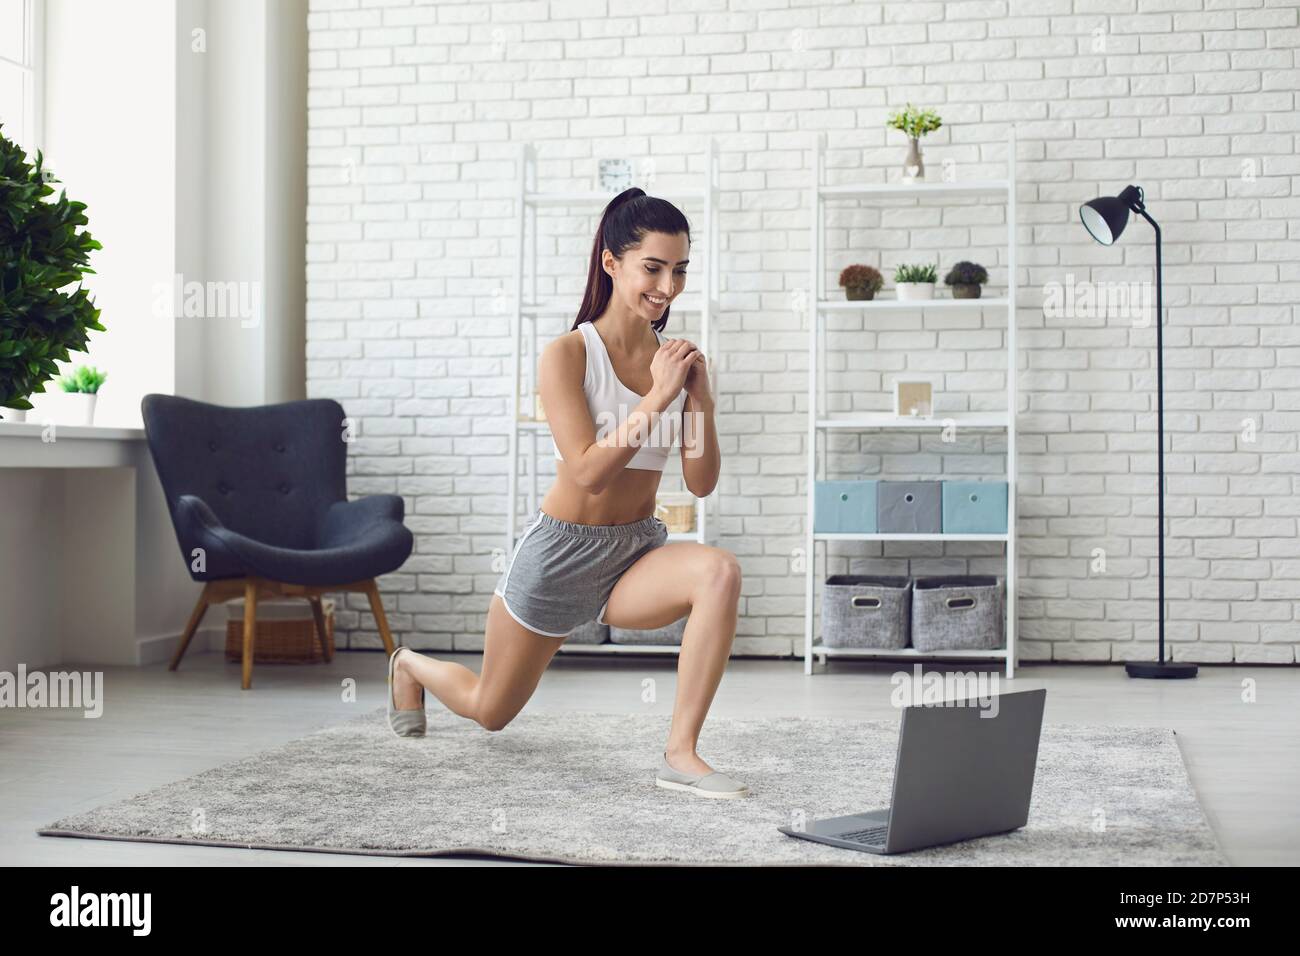 Smiling girl doing sports workout during online lesson on laptop at home Stock Photo